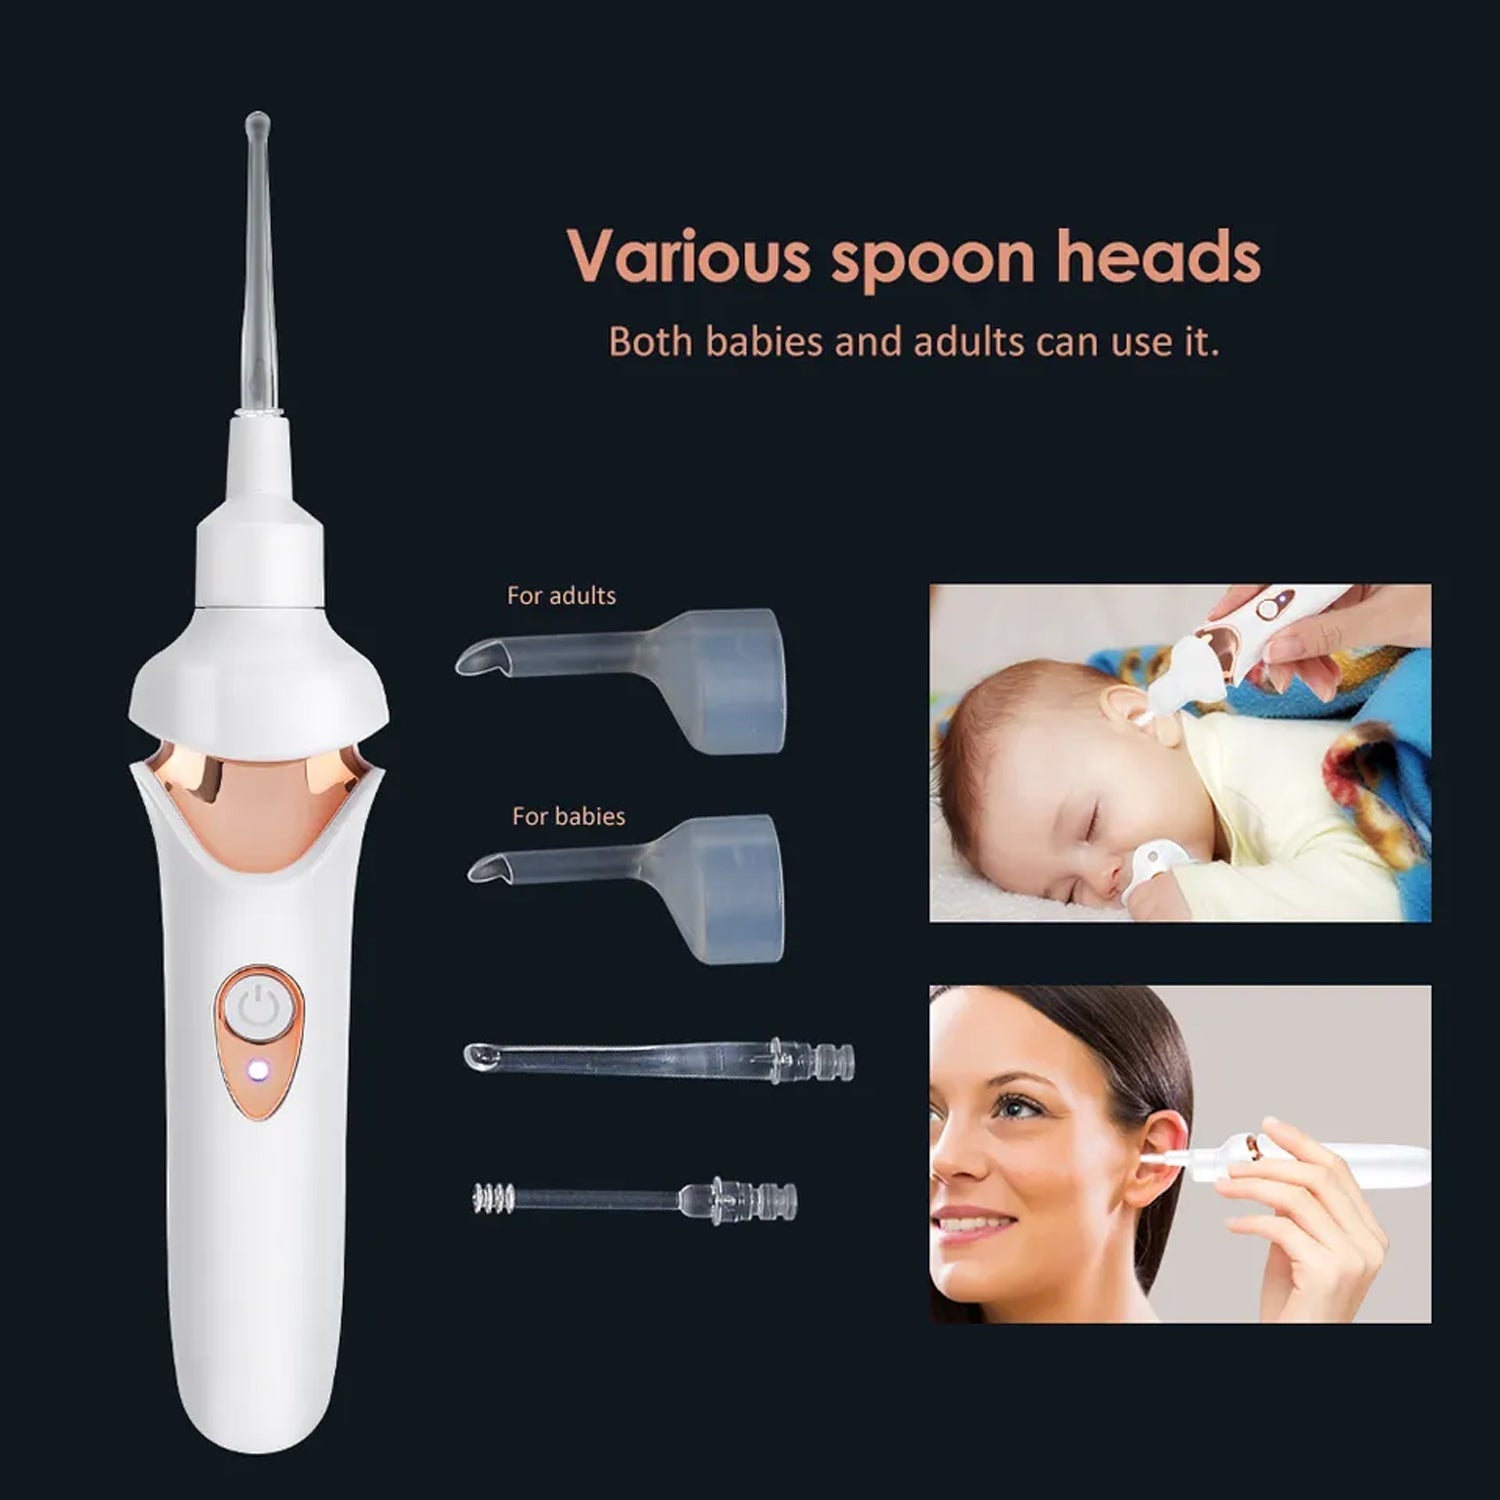 7707 EAR SUCTION DEVICE, PORTABLE COMFORTABLE EFFICIENT AUTOMATIC ELECTRIC VACUUM SOFT EAR PICK EAR CLEANER EASY EARWAX REMOVER SOFT PREVENT EAR-PICK CLEAN TOOLS SET FOR ADULTS KIDS JK Trends